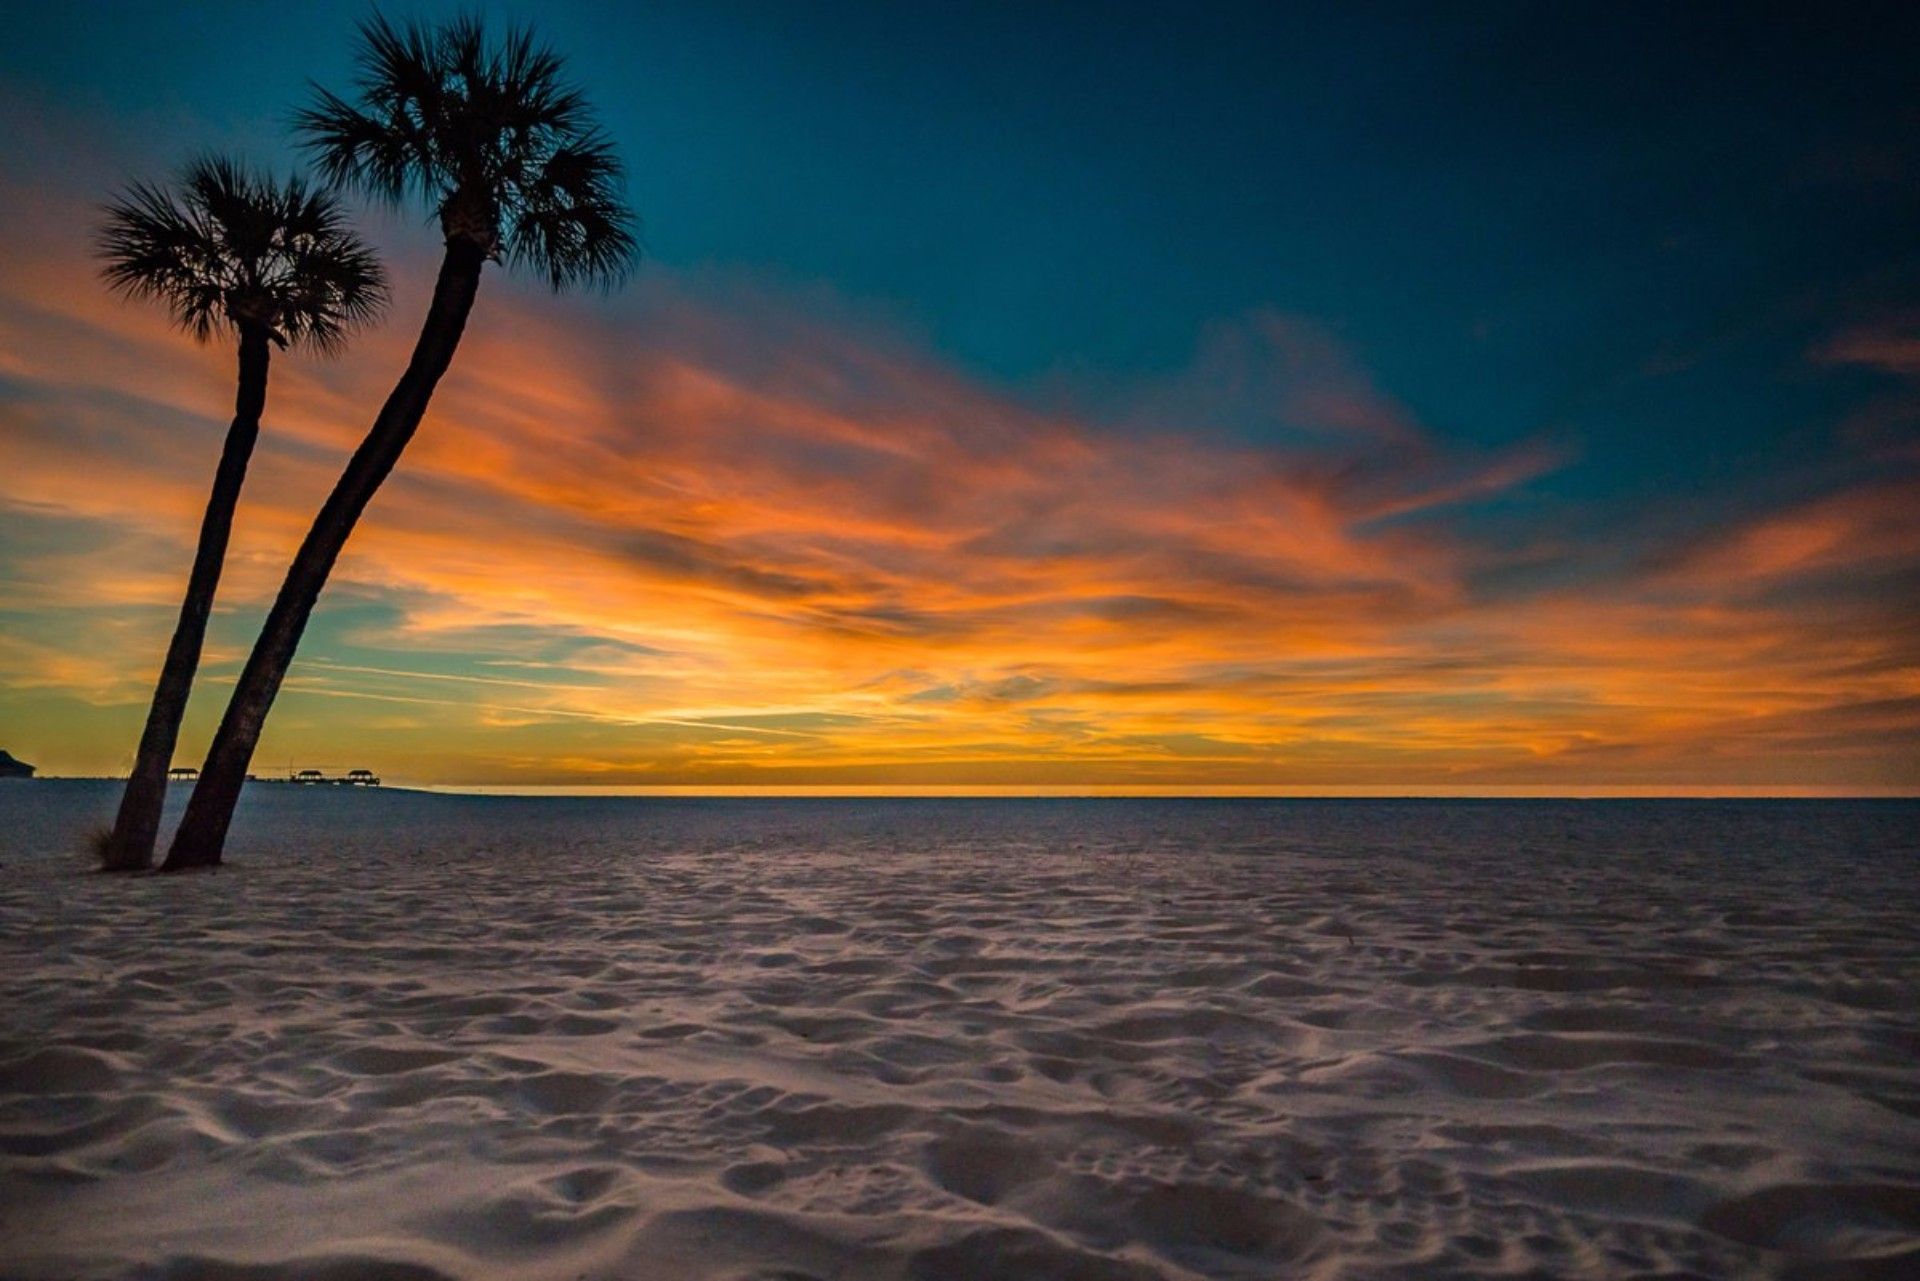 A sunset with palm trees on the beach - Florida